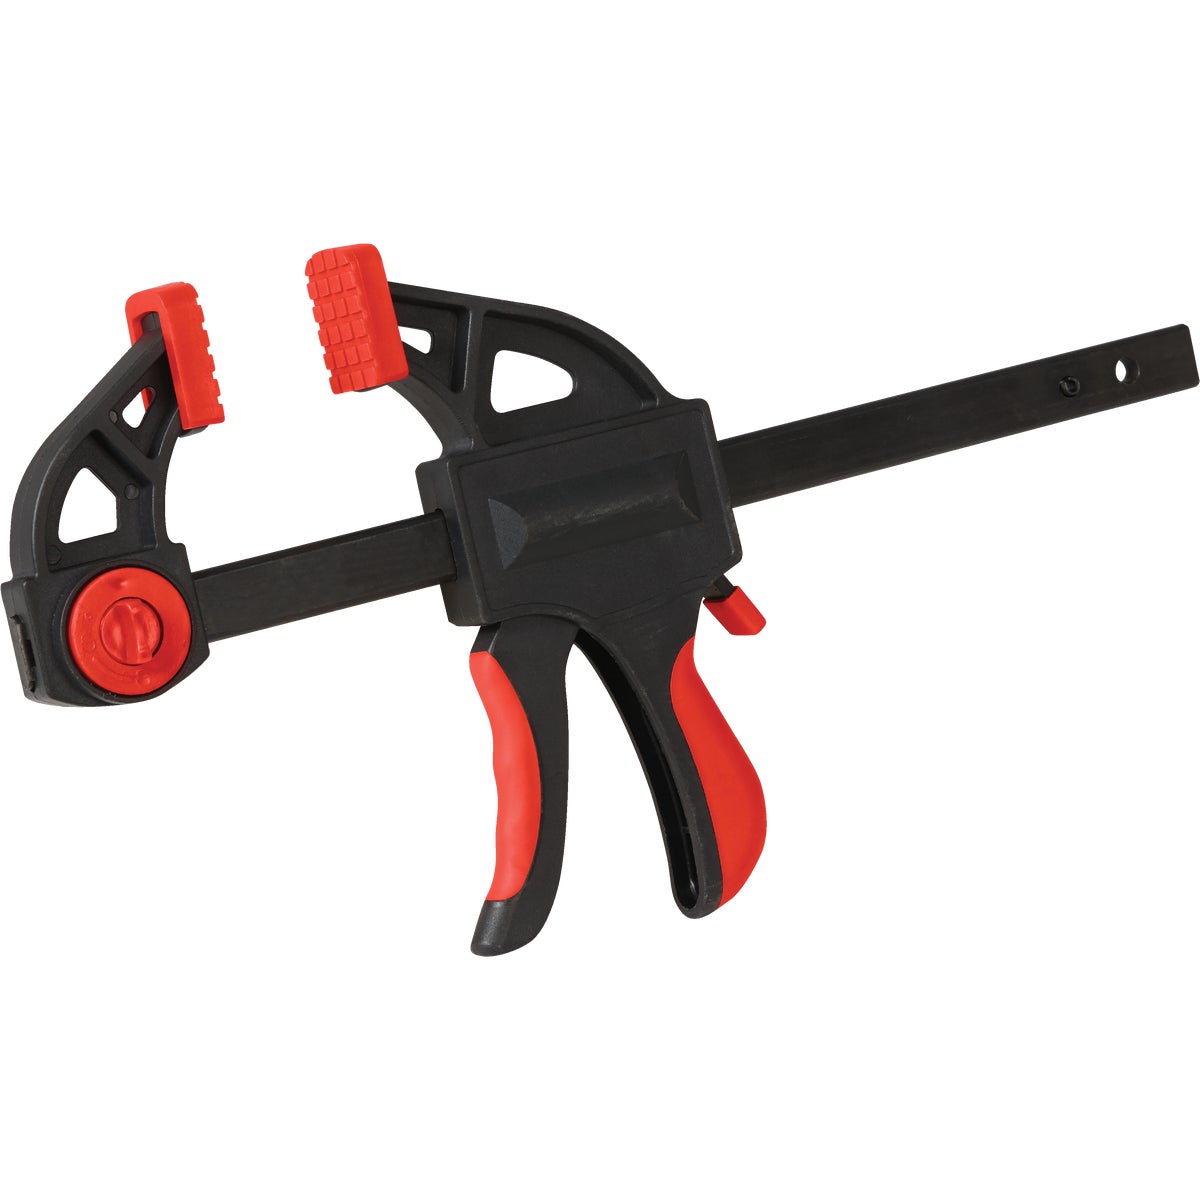 Do it Pistol Grip 6 In. One-Hand Bar Clamp and Spreader